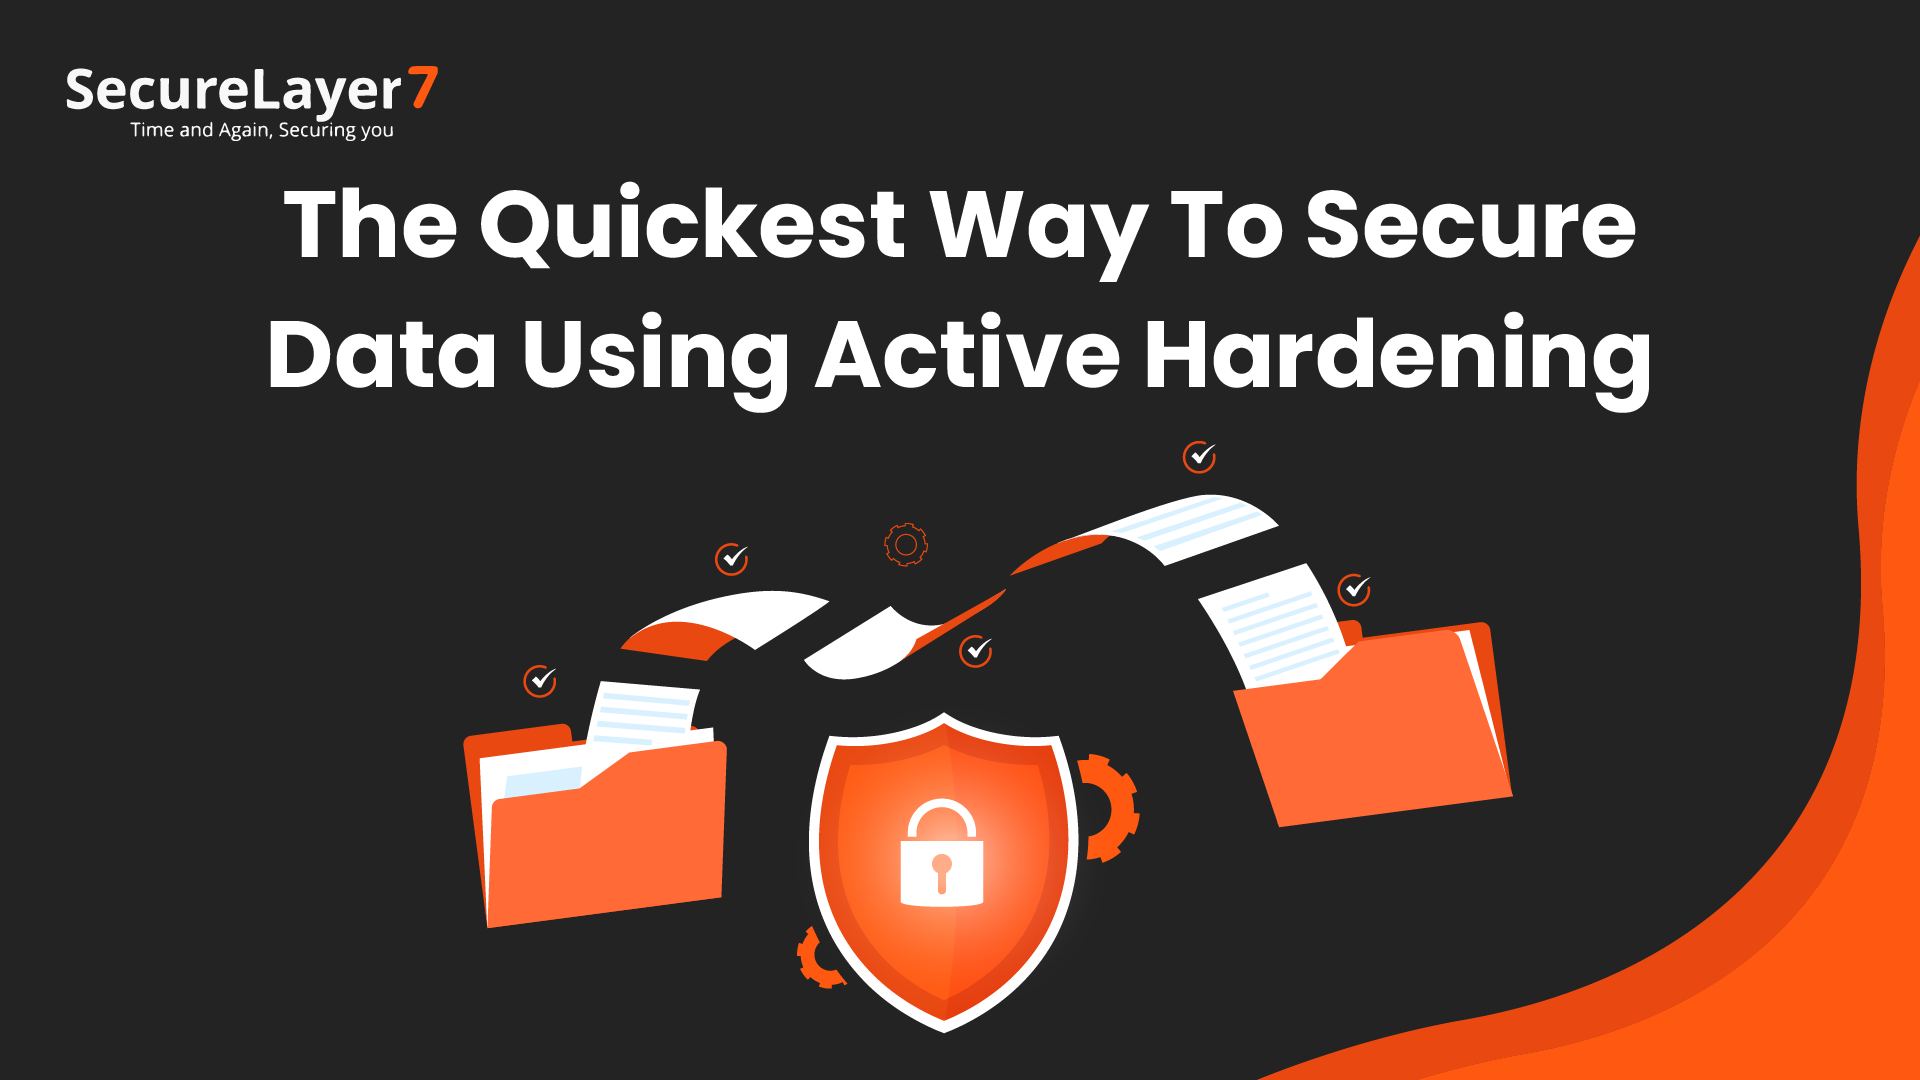 The Quickest Way to Secure Your Data: Use Active Hardening